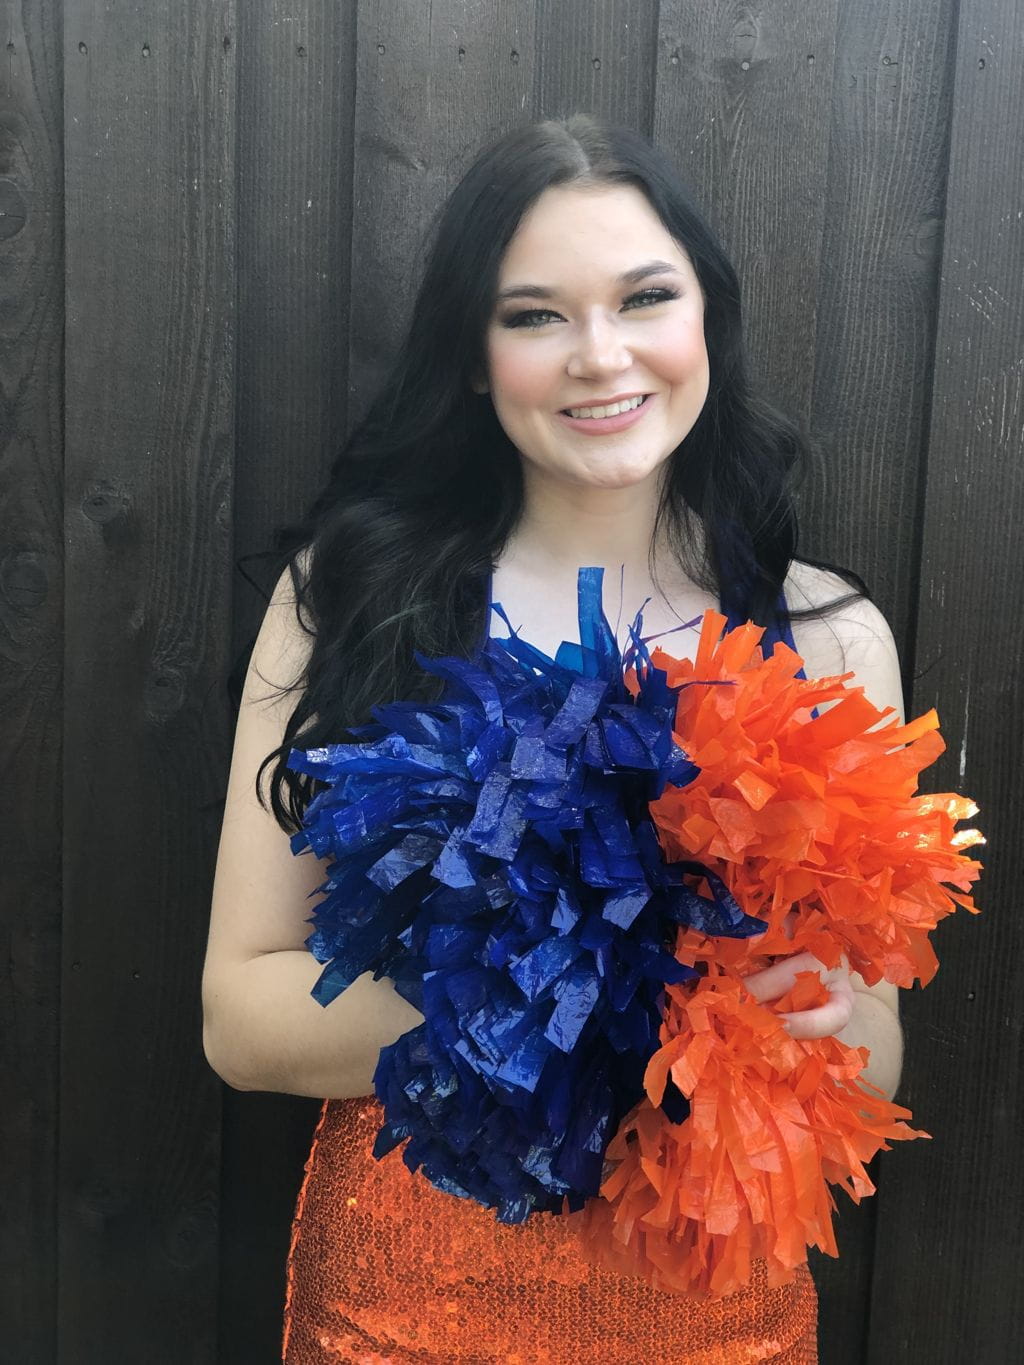 Dancer Kyra Gaskill smiling with her pompoms